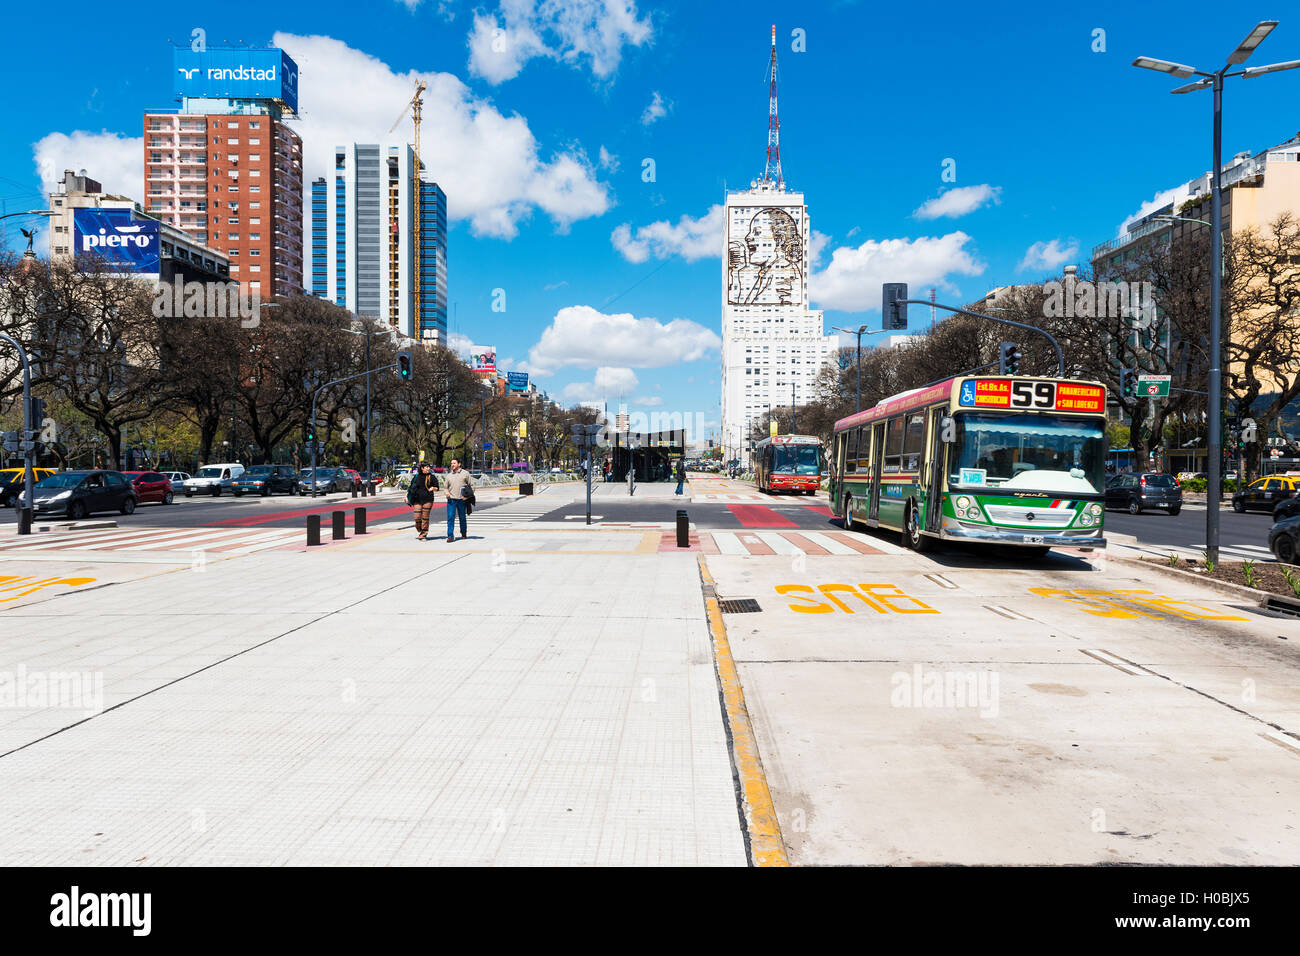 Buenos Aires, Argentina - October 4, 2013: View of the Avenida 9 de Julio in the city of Buenos Aires Stock Photo